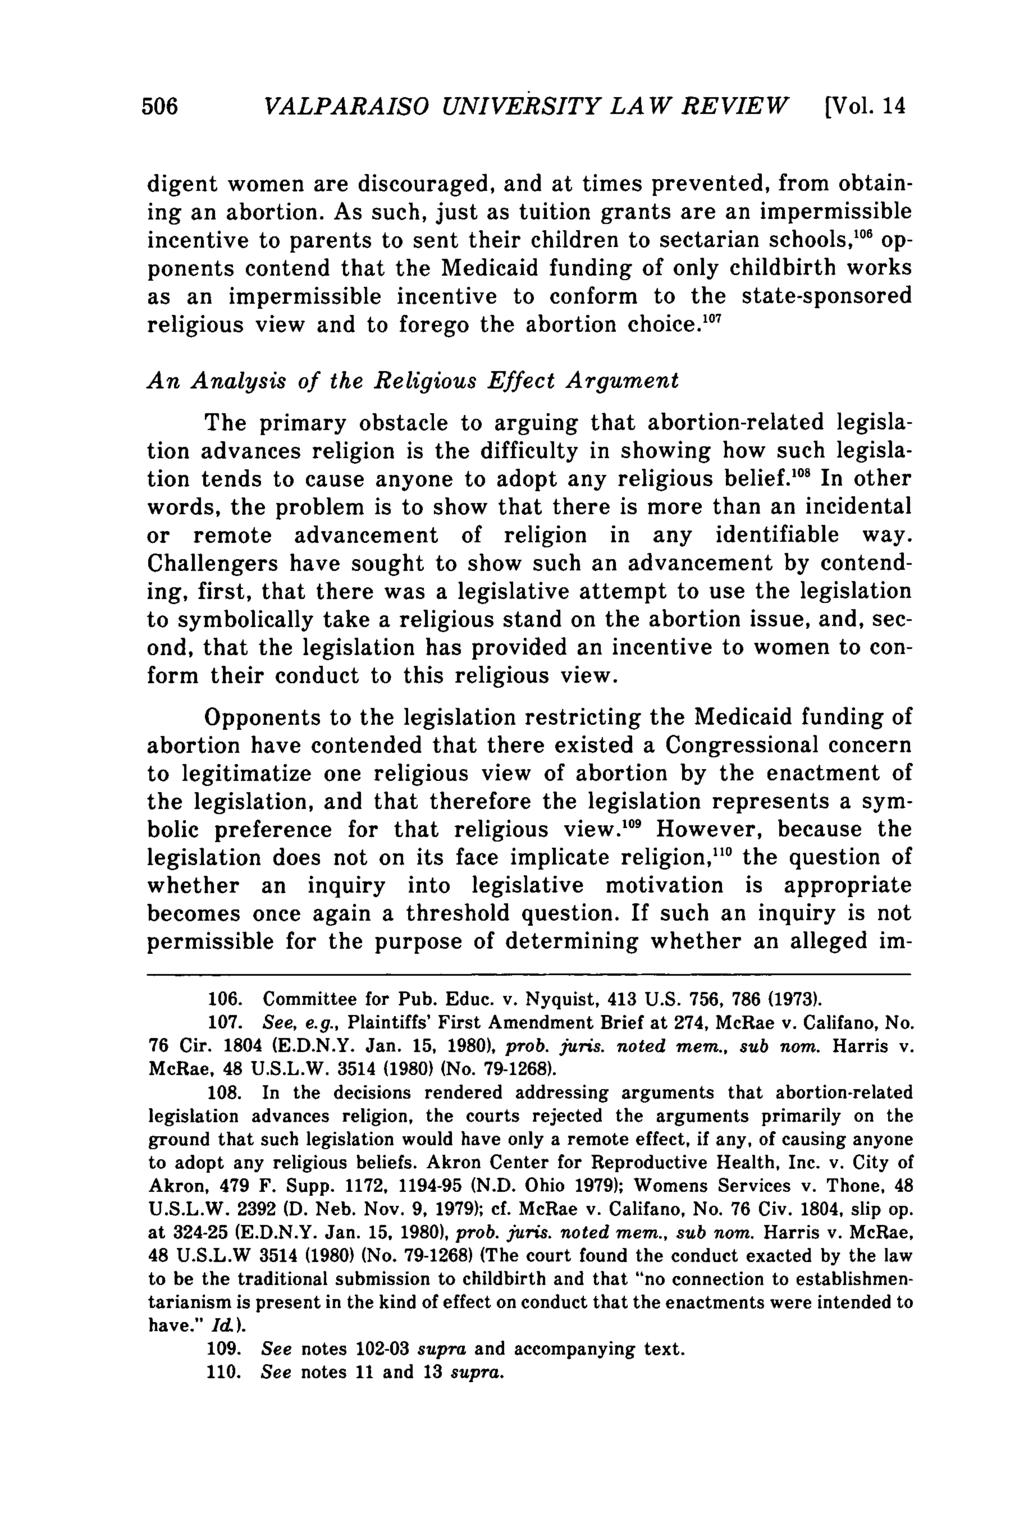 Valparaiso University Law Review, Vol. 14, No. 3 [1980], Art. 4 506 VALPARAISO UNIVERSITY LA W REVIEW [Vol. 14 digent women are discouraged, and at times prevented, from obtaining an abortion.